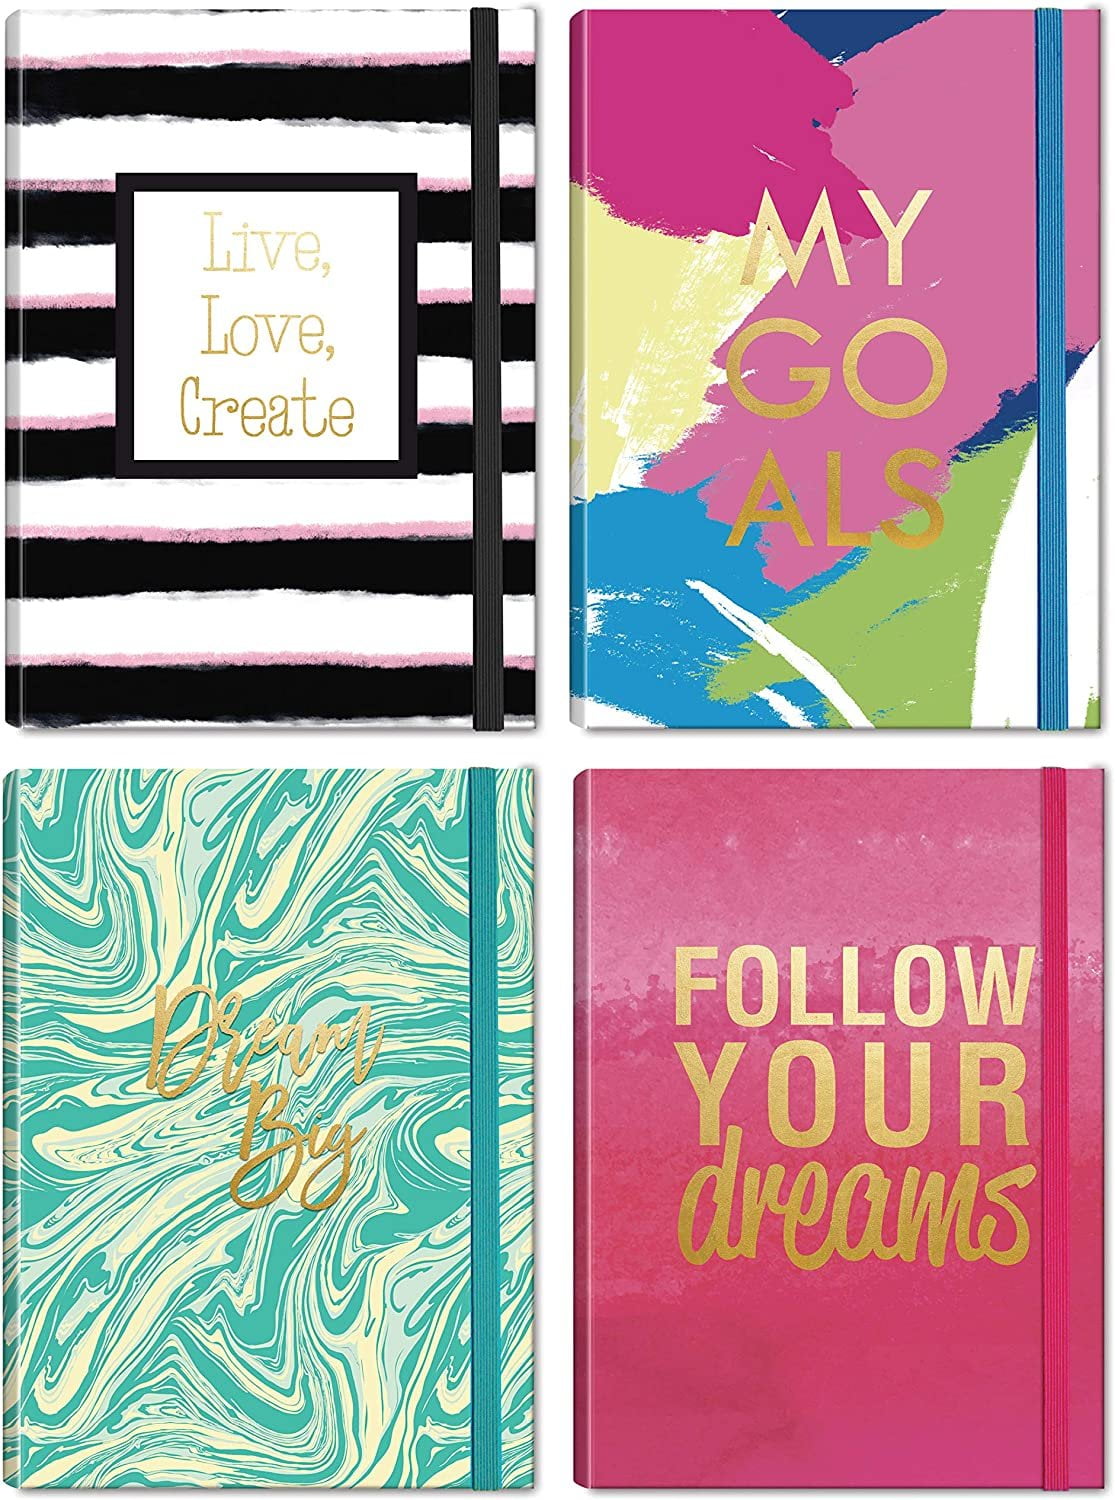 HARDBACK JOURNALS stationary floral prints inspirational 5 x 7 60 lined pages 